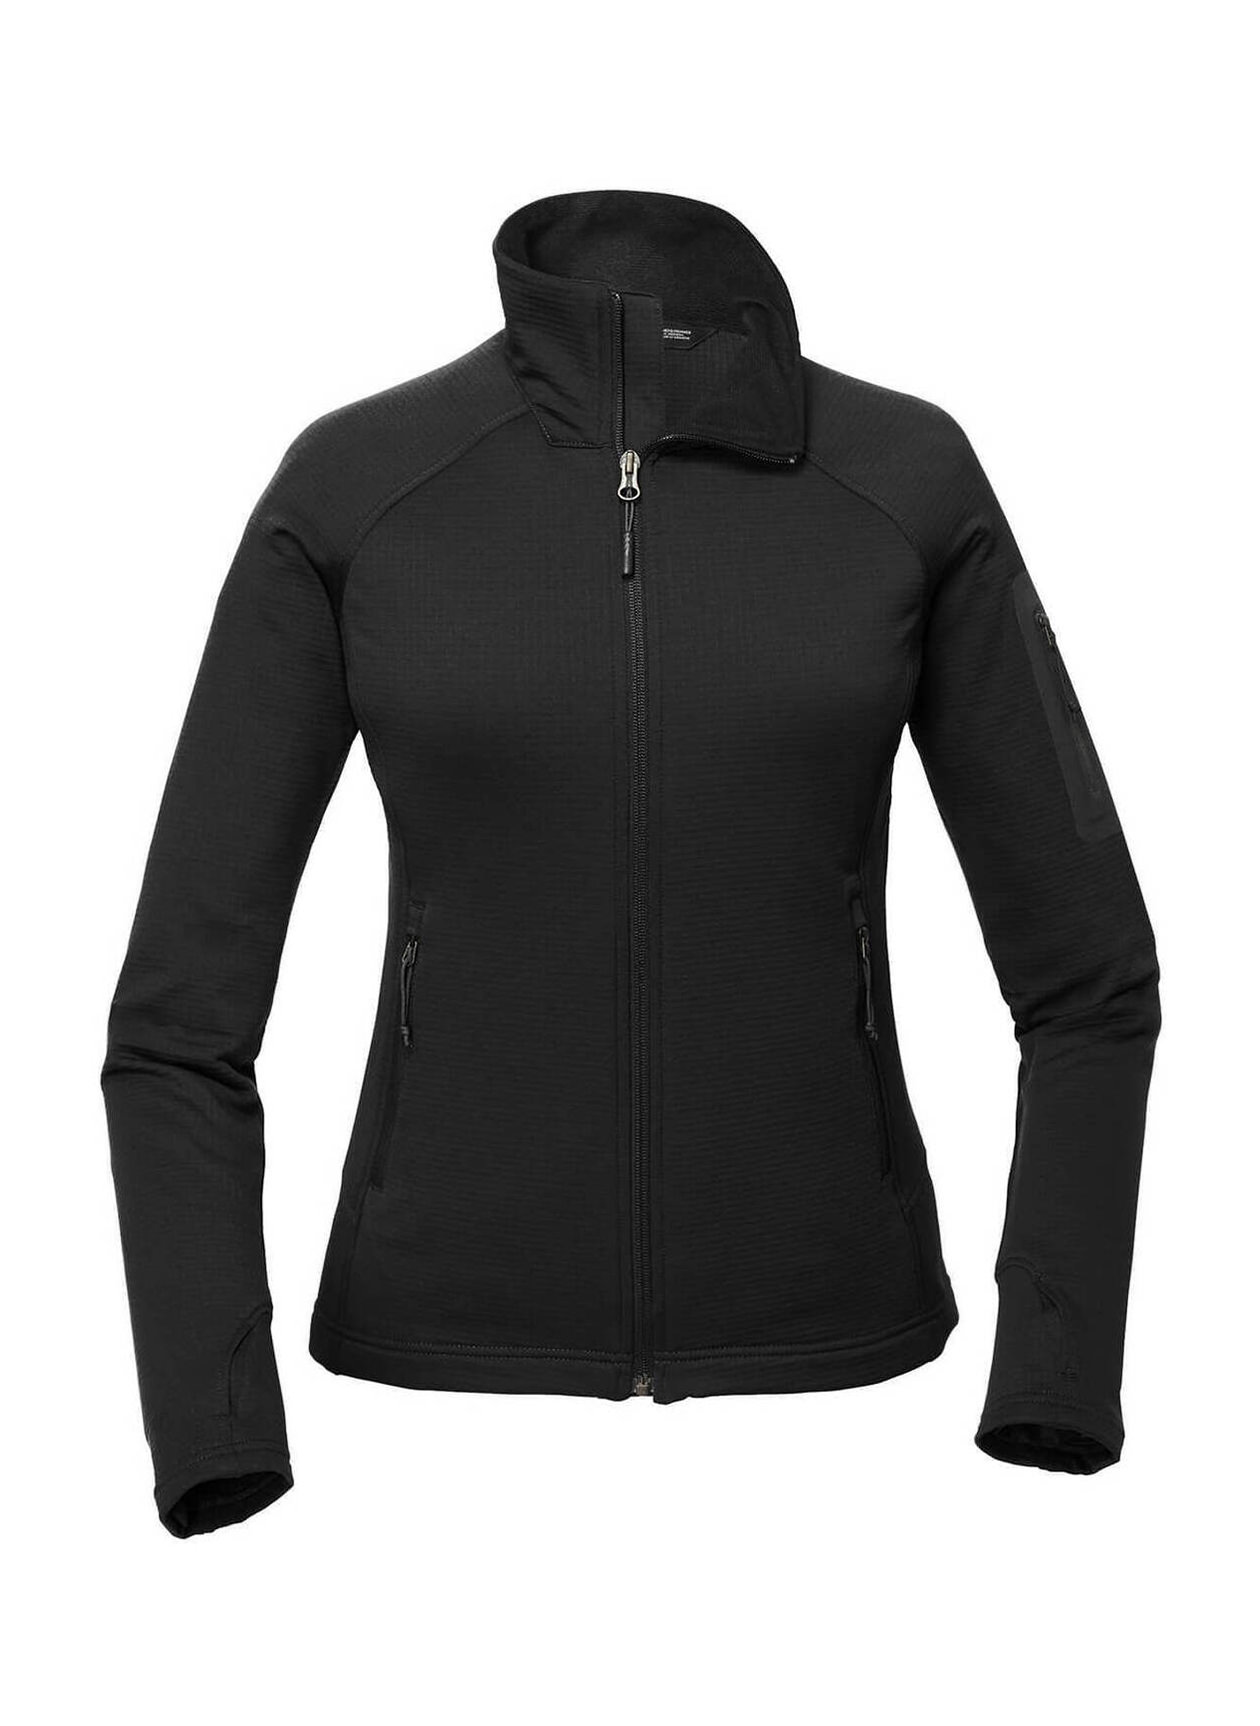 The North Face Women's Black Mountain Peaks Jacket